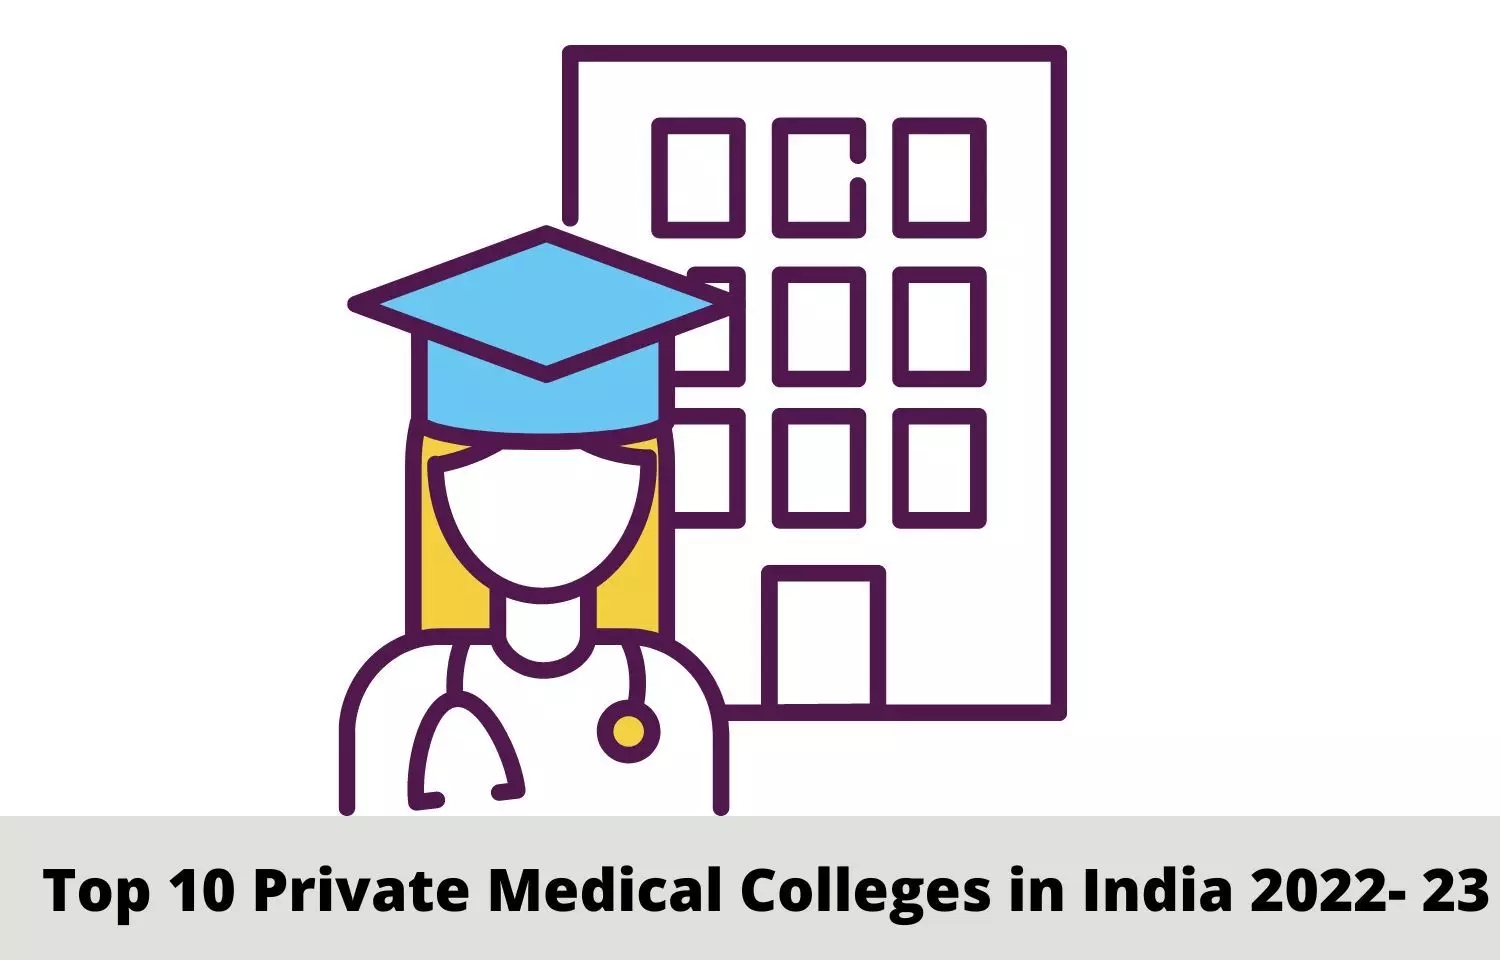 Top 10 Private Medical Colleges in India 2022- 23